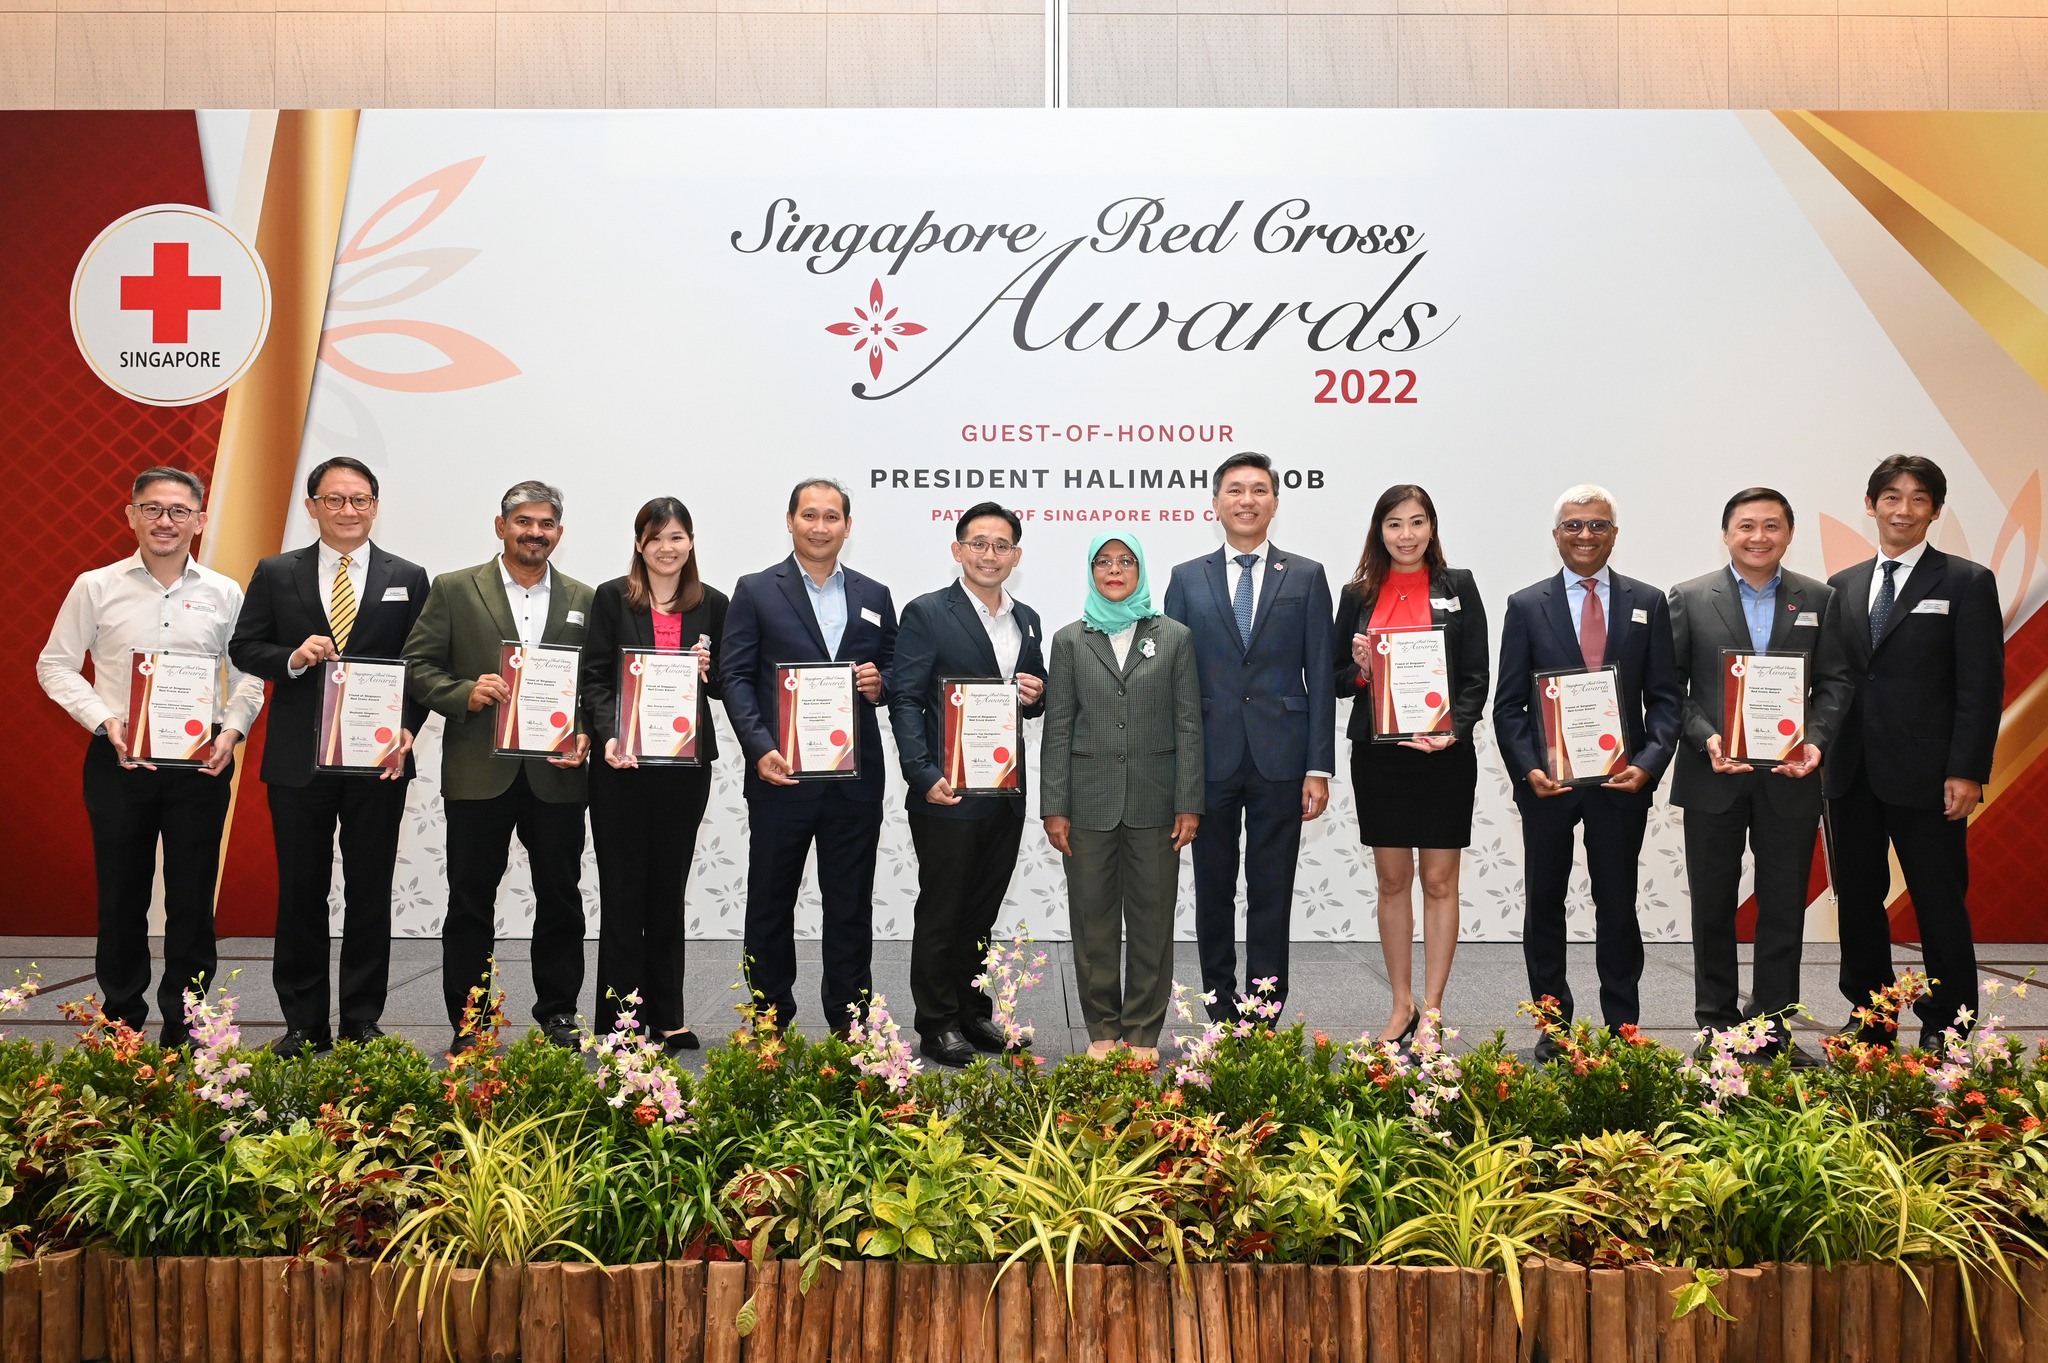 Recipients of the Friend of Singapore Red Cross Award Group 2